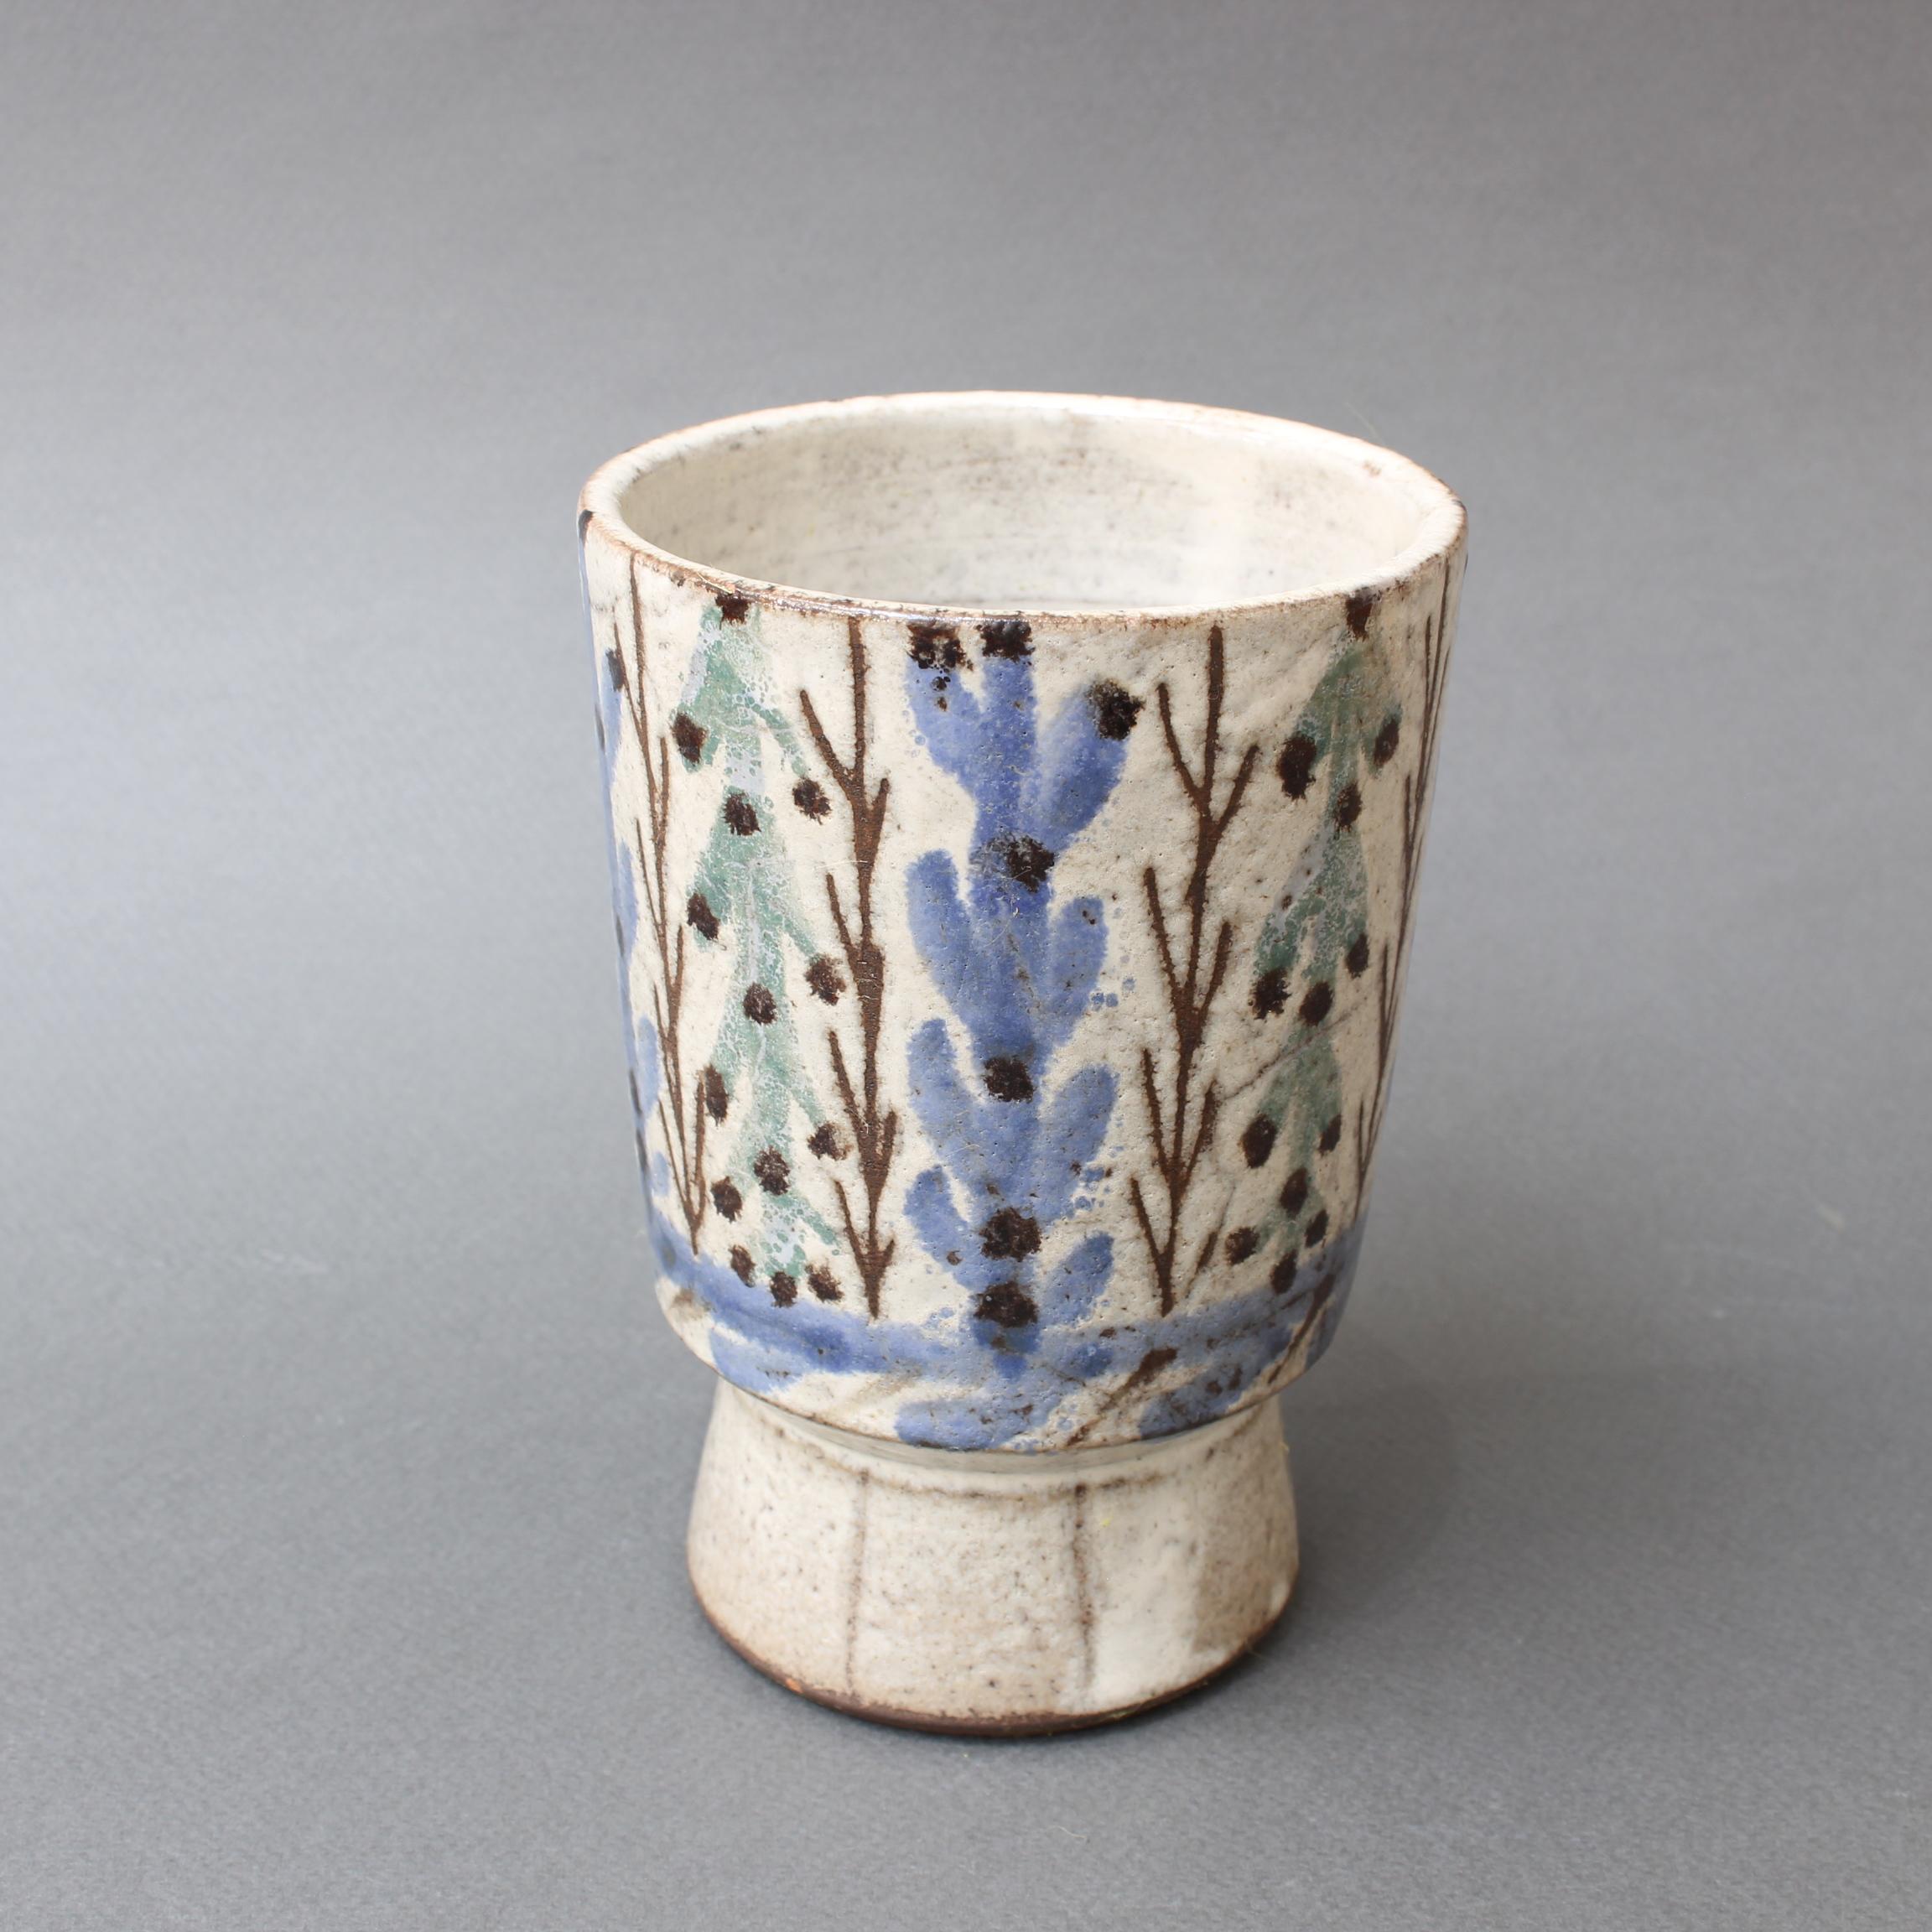 Small vintage ceramic vase by Gustave Reynaud, Le Mûrier (circa 1950s). This delightful flower vase is a work of art in the trademark style of Gustave Reynaud. On the rustic exterior you will find charming foliage with baby blue petals along with